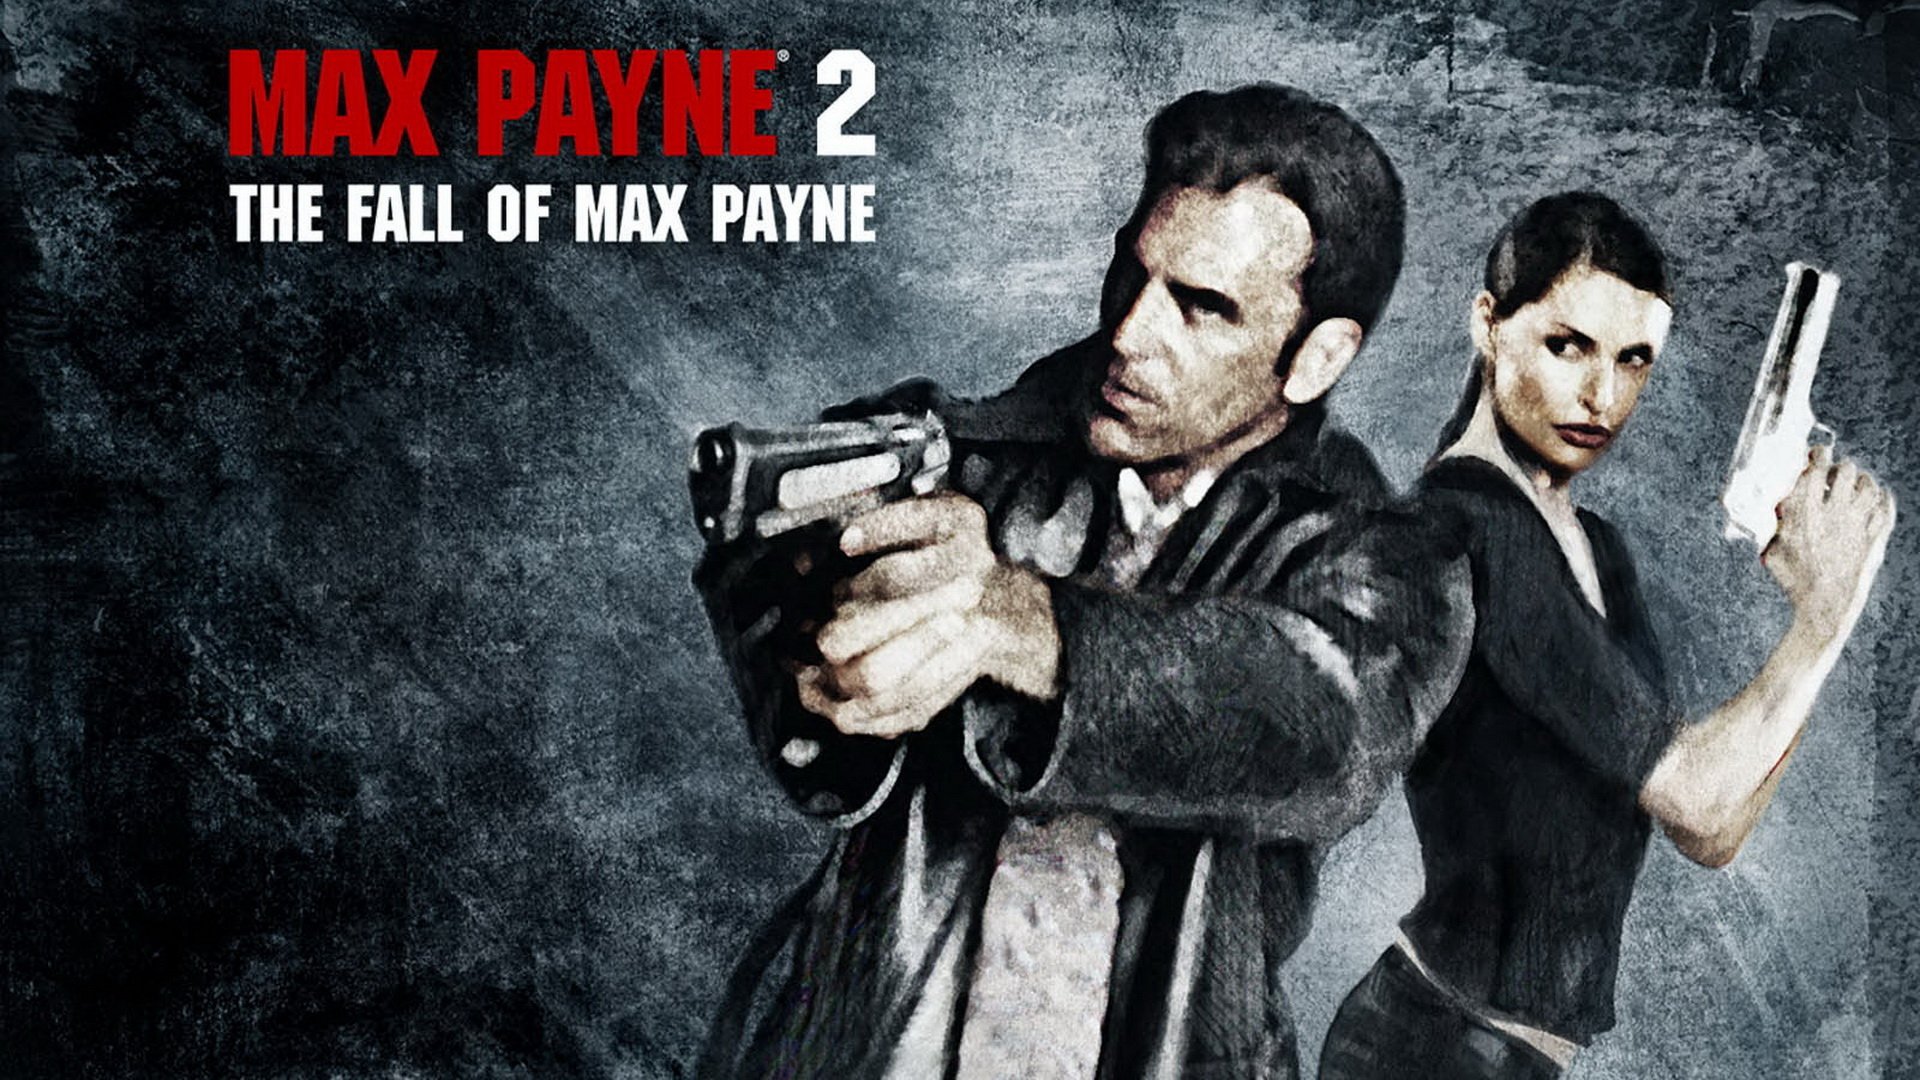 max payne 2 the fall of max payne release date